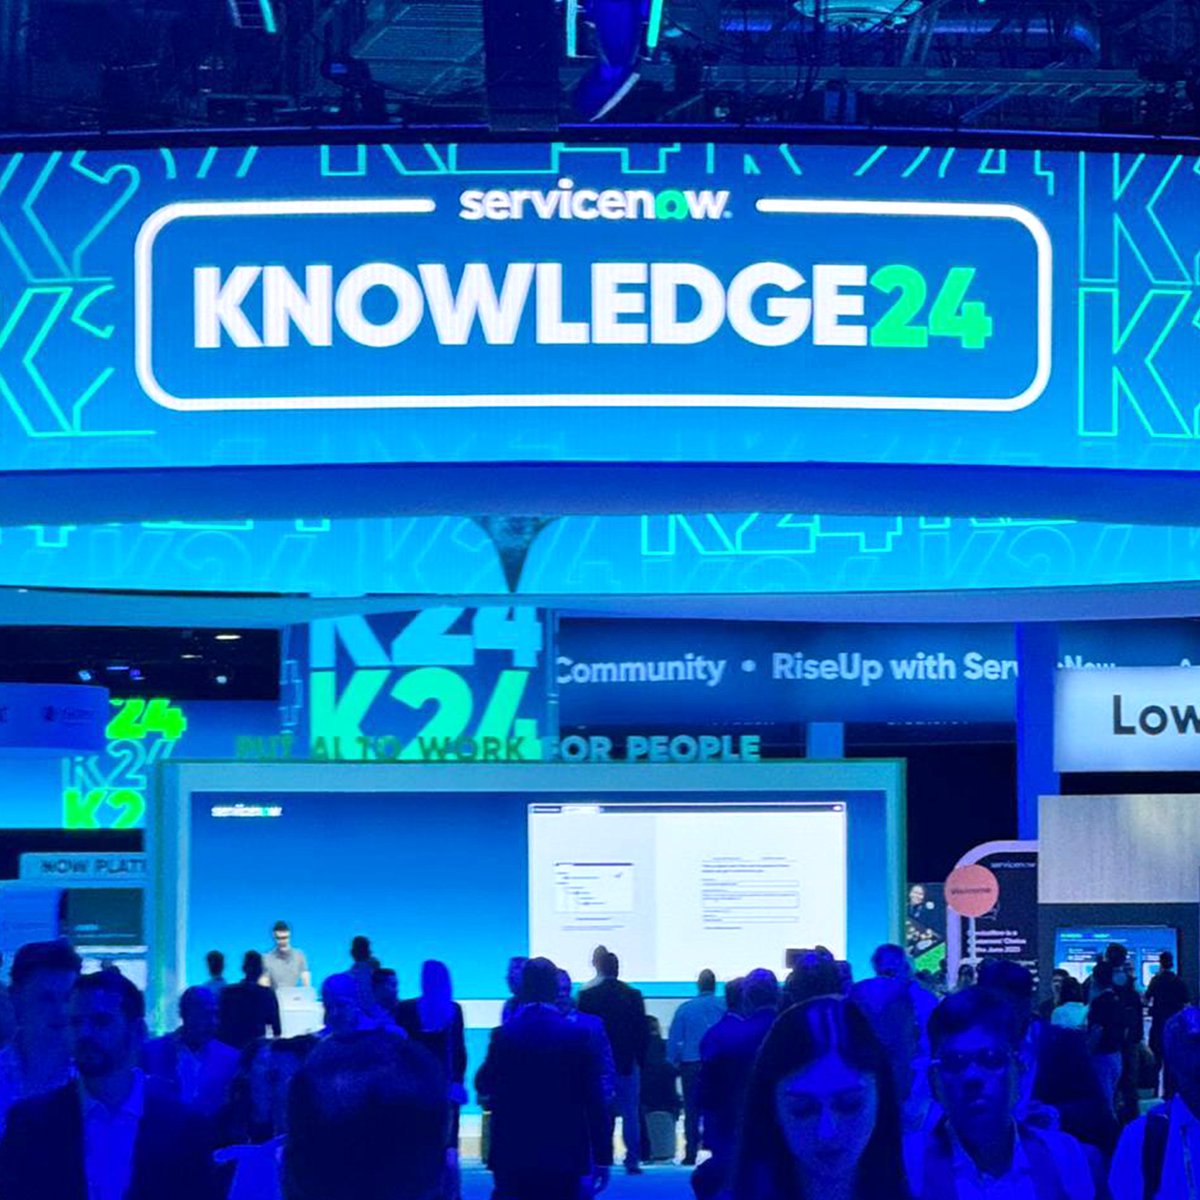 Our CEO, @avanishkamboj, is at #Knowledge24, representing Binmile's vision for an AI-powered future! In this photo with @Kerryislin, Senior Director at #ServiceNow, the buzz is palpable. Follow us for insights on #AI's role in innovation and growth!